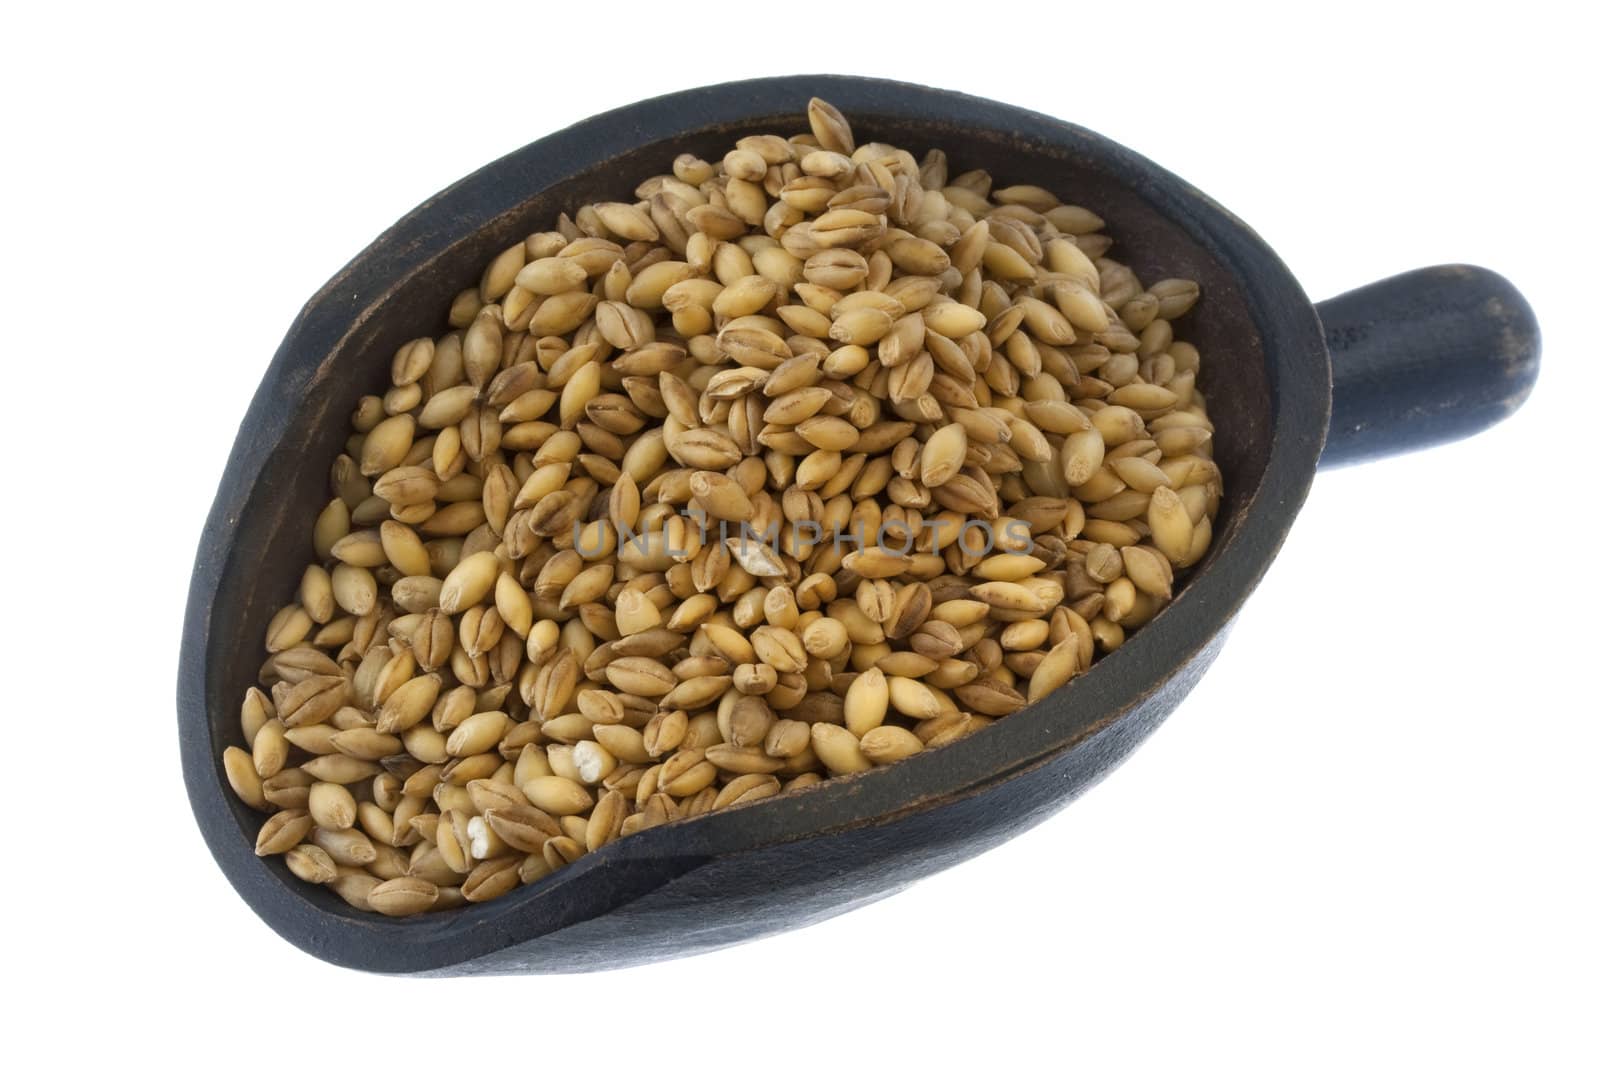 hulled barley grain on a rustic, wooden scoop, isolated on white